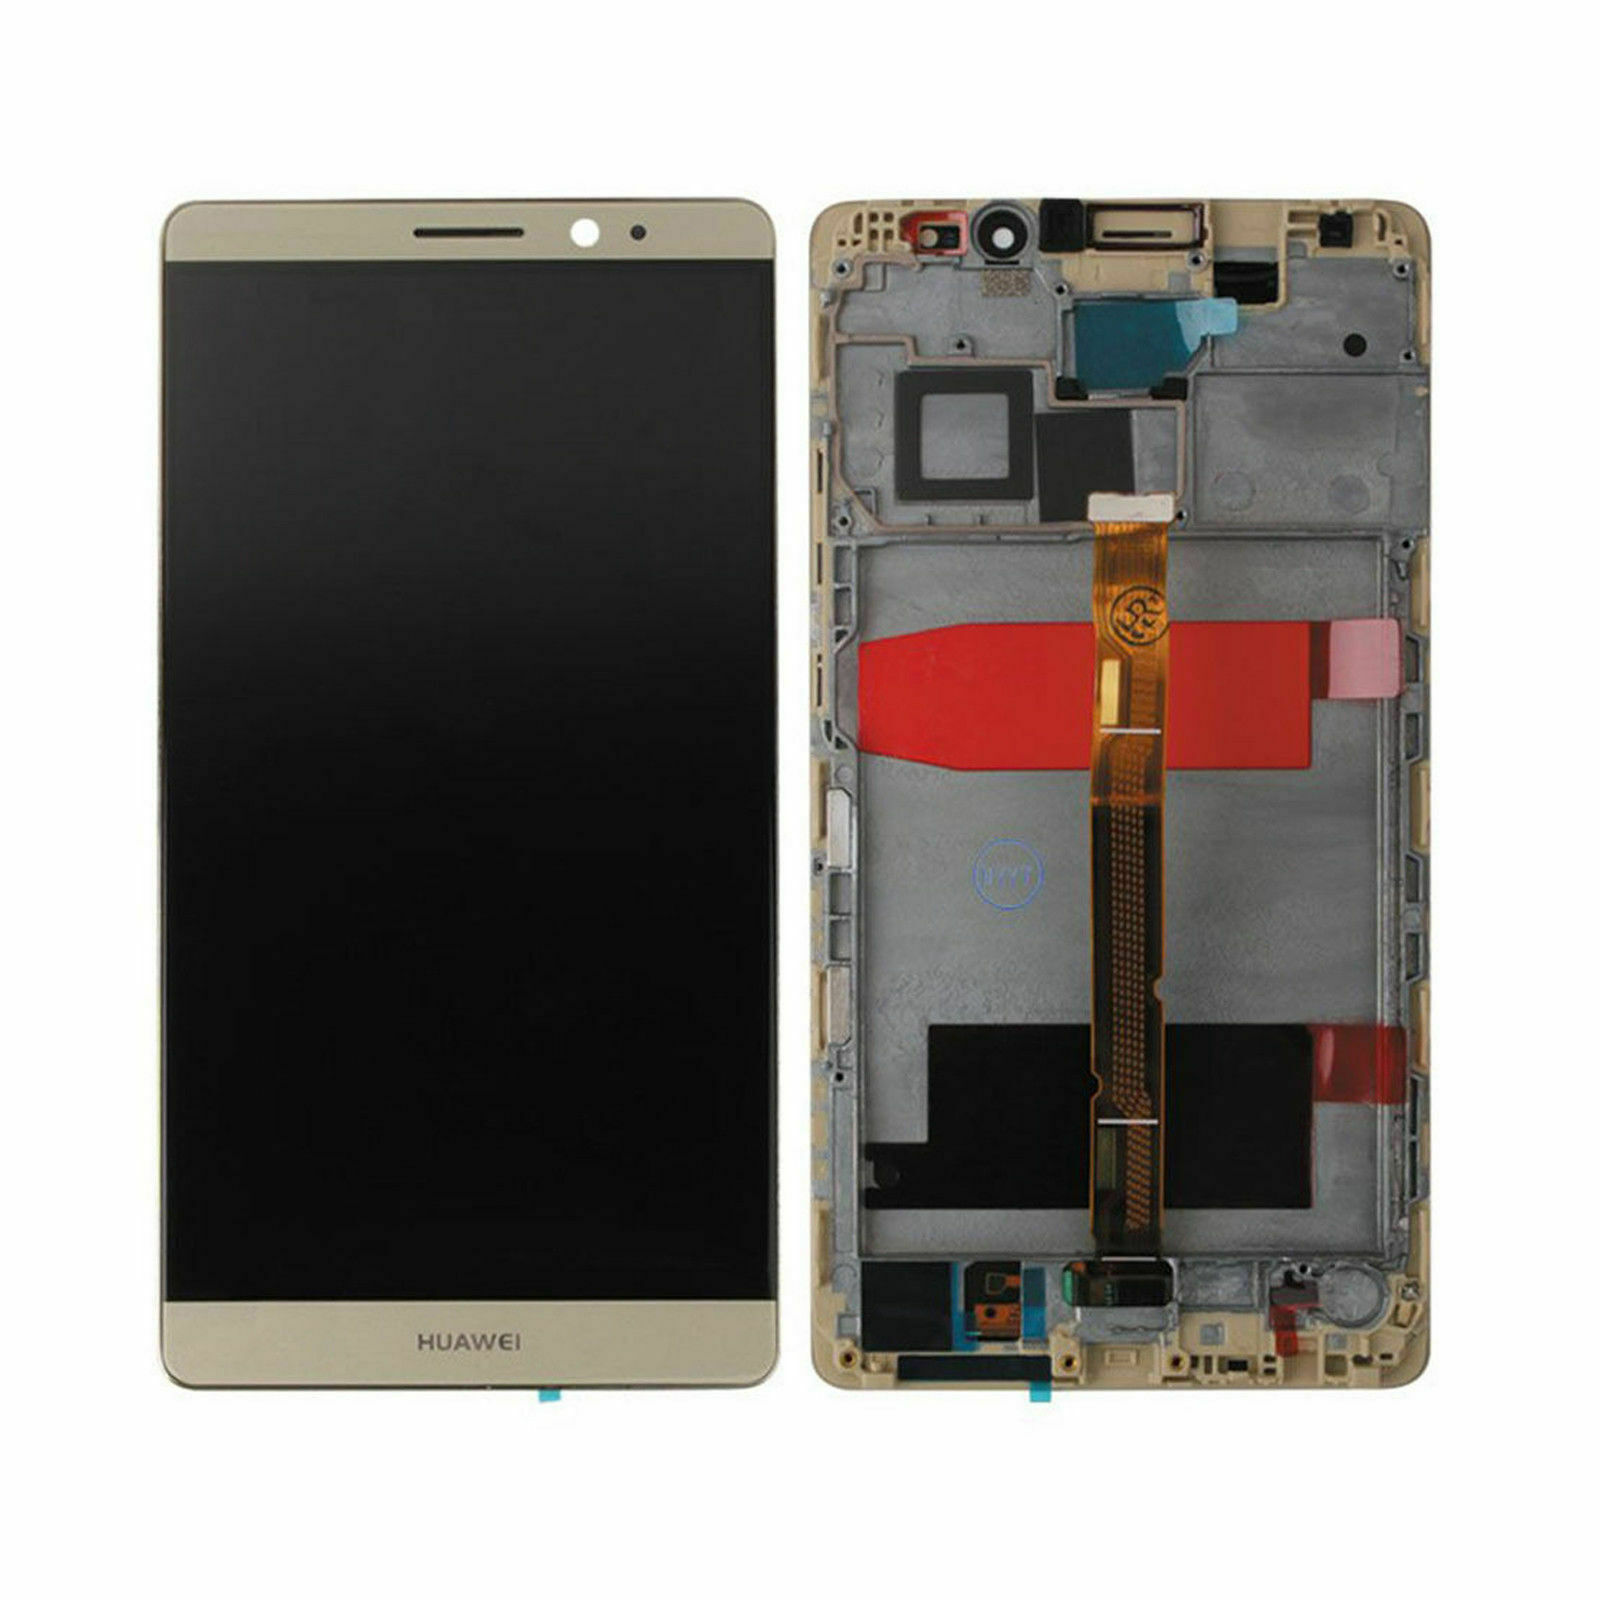 OUCH LCD HUAWEI MATE 8